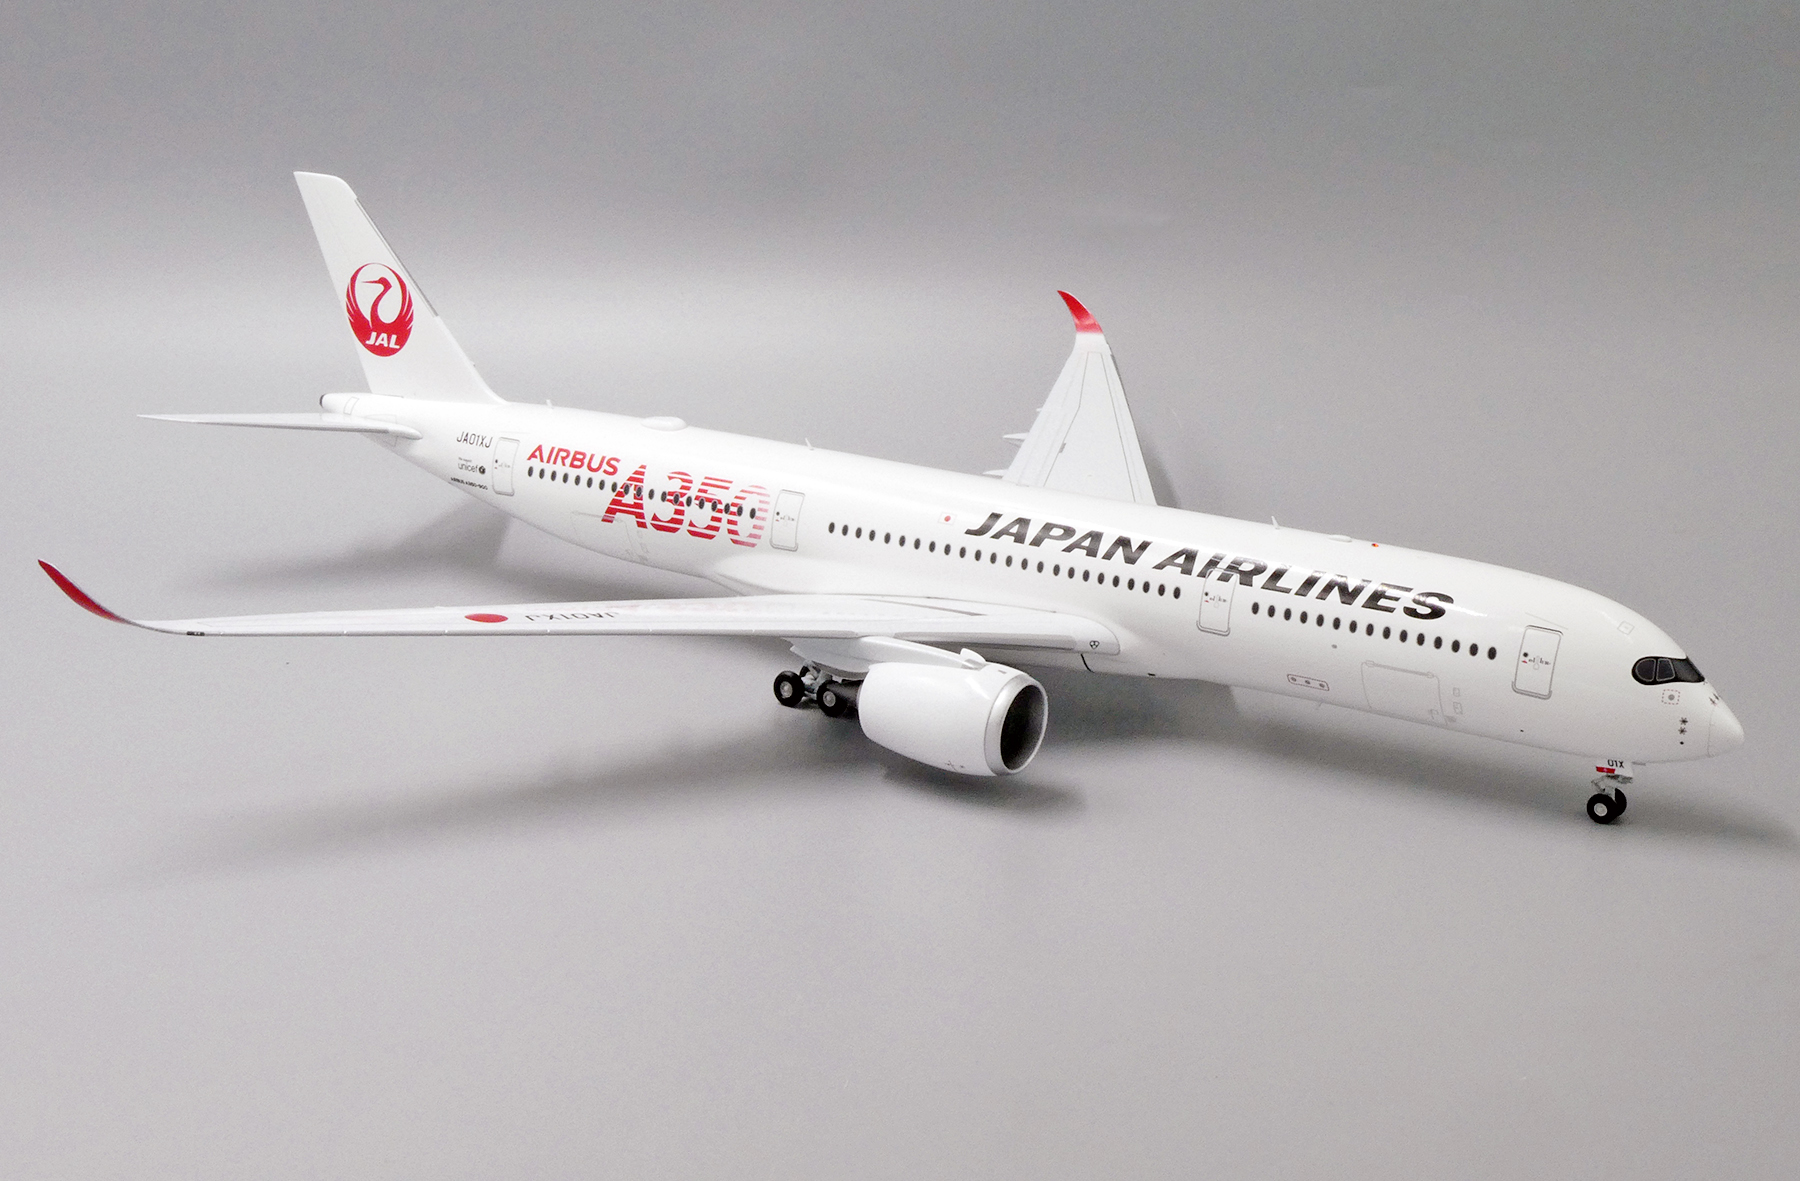 Details about   JC Wings AIRBUS A350-900 F-WZGG 1/200 diecast plane model aircraft 